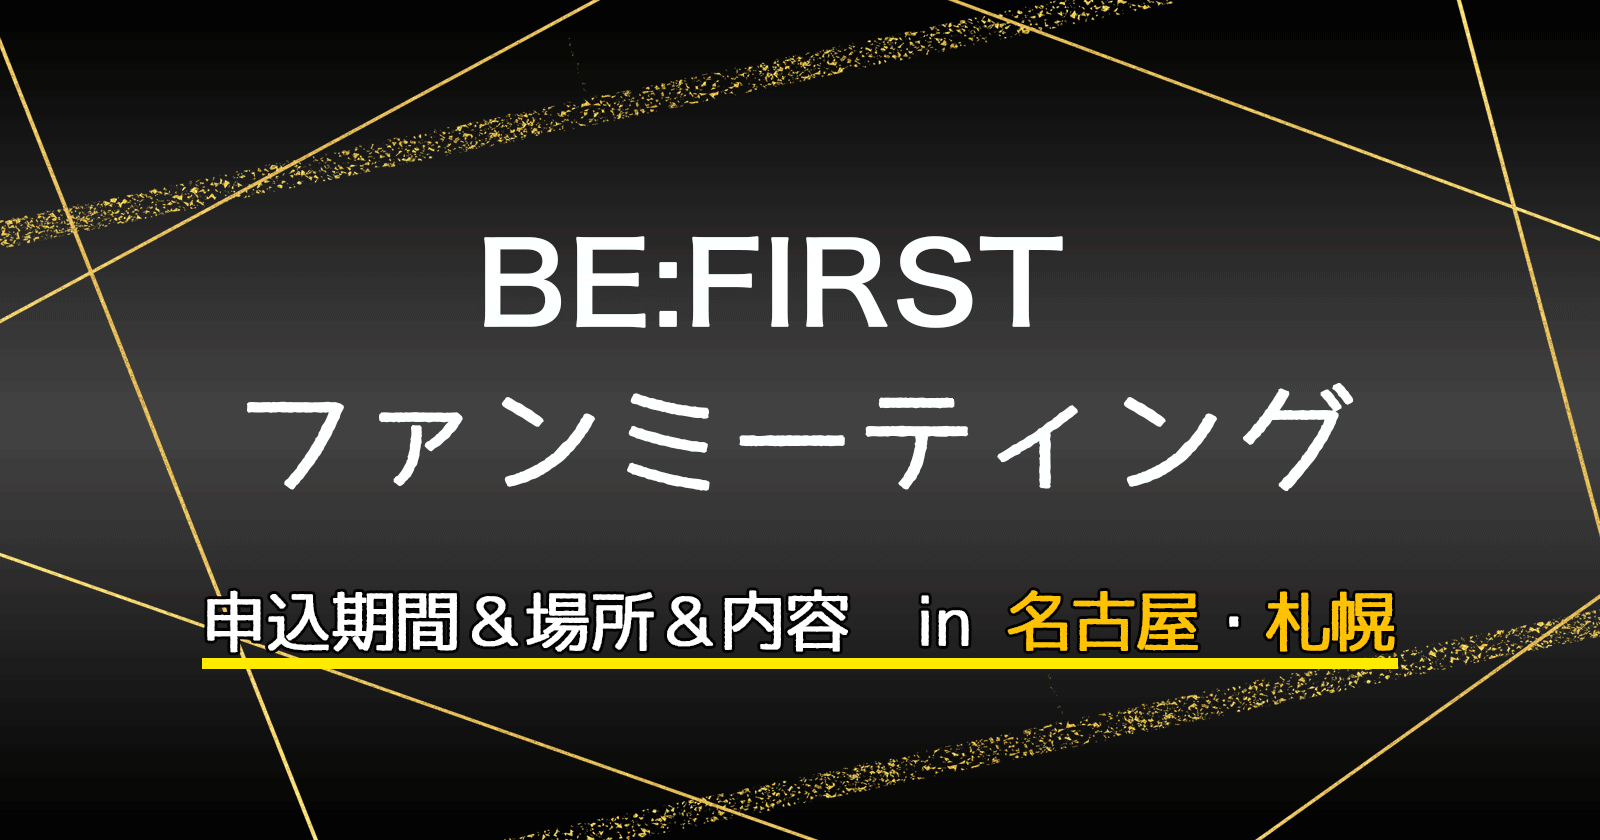 Be Firstファンミーティング 名古屋 札幌 申込期間や場所 内容 Somi Trend Style